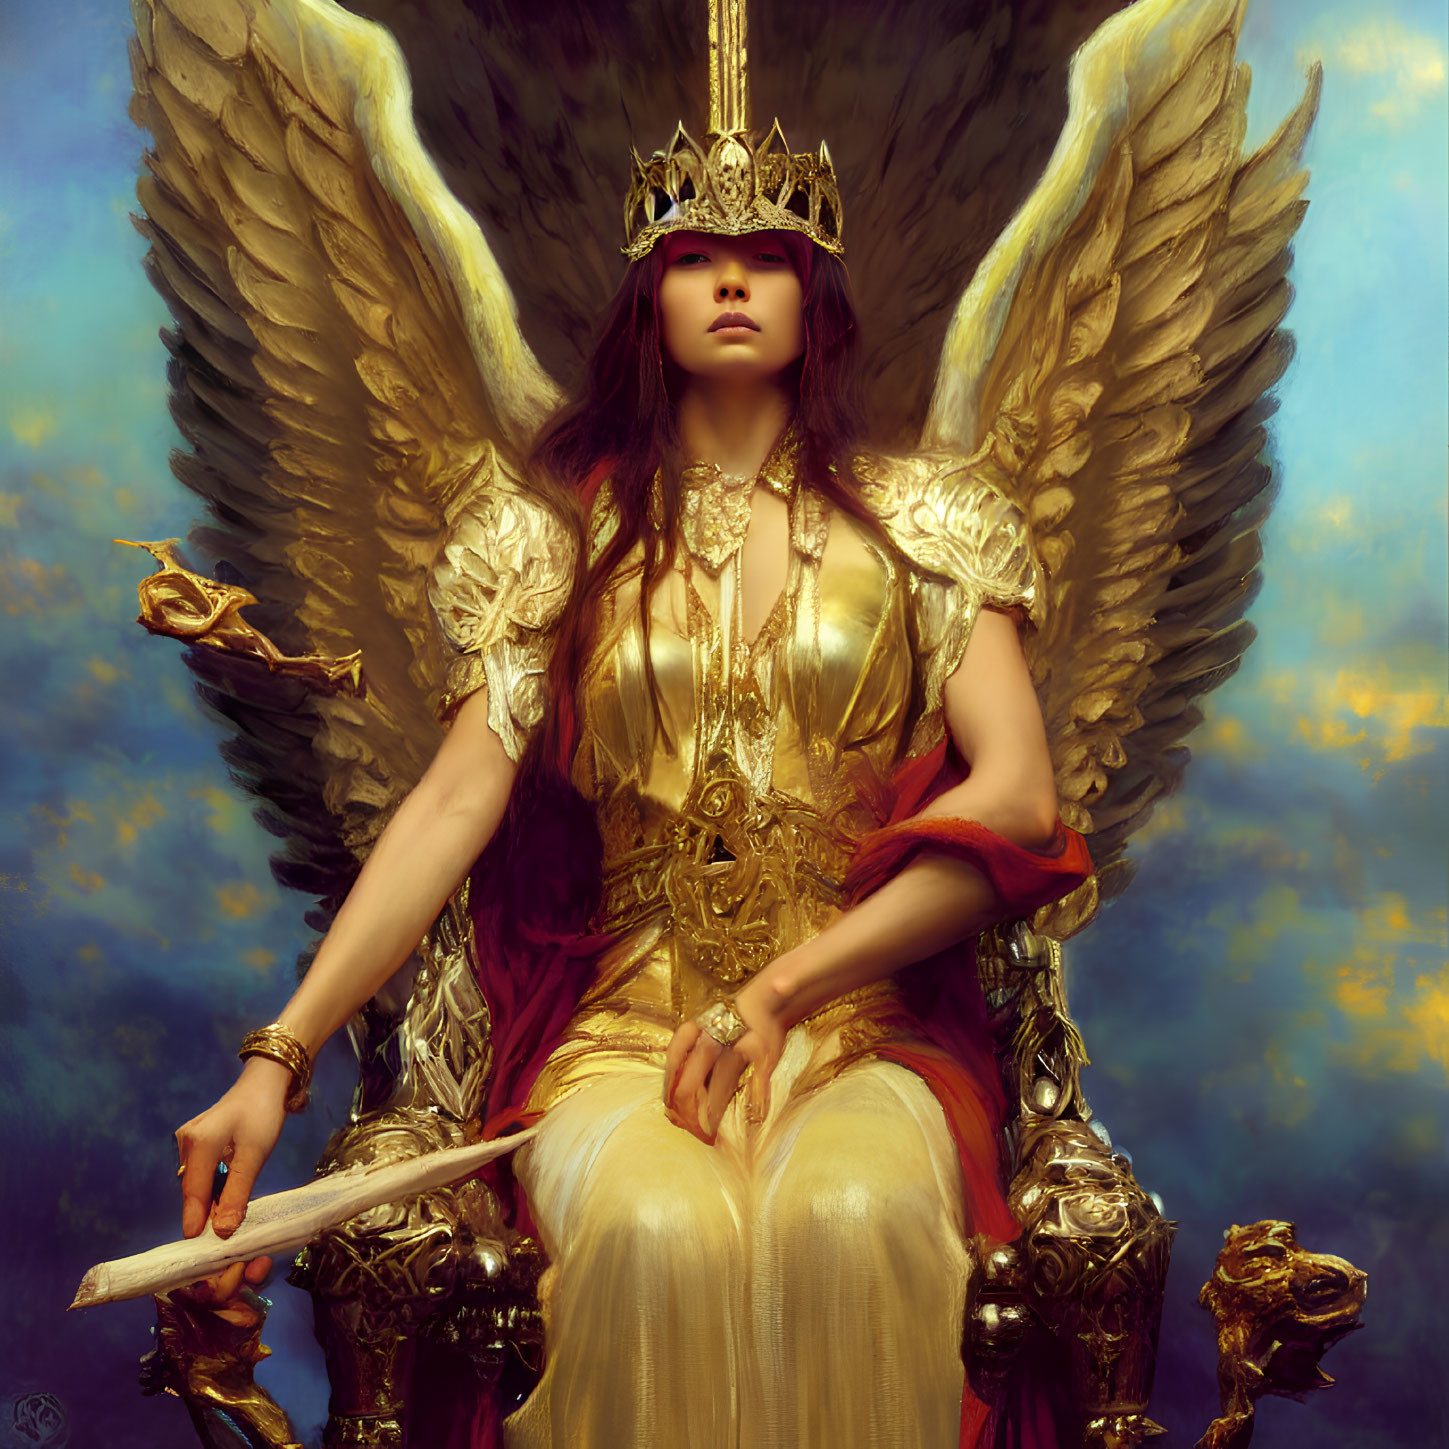 Regal figure in golden armor on throne with feathered wings